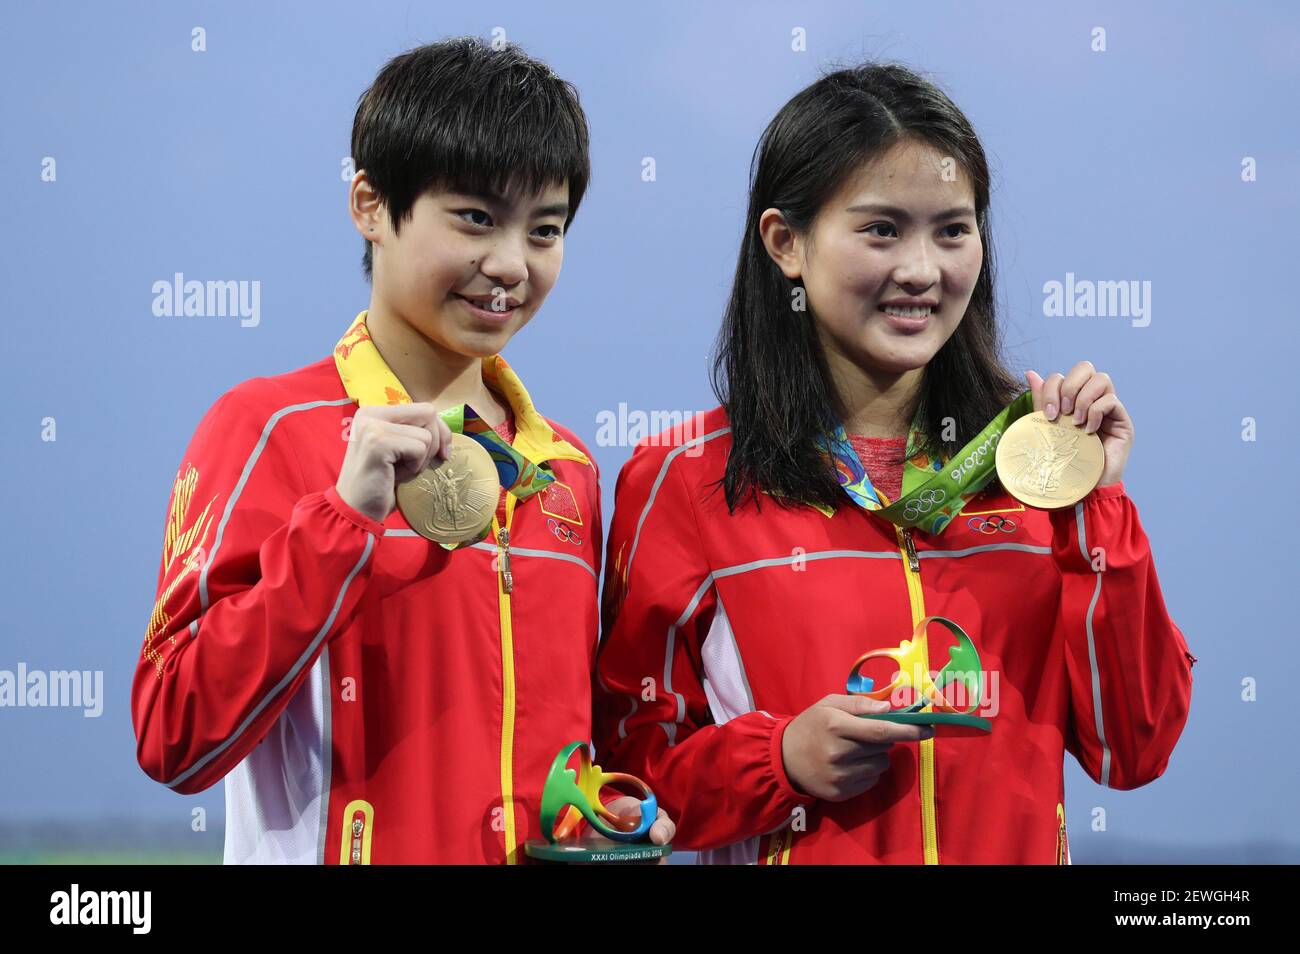 RIO DE JANEIRO, RJ - 09.08.2016: OLYMPICS 2016 DIVING - Ruolin Chen (CHN) and Huixia Liu (CHN) gold medal during the Synchronised Diving 10 meters platform Rio 2016 Olympics held in the Maria Lenk Aquatic Center. NOT AVAILABLE FOR LICENSING IN CHINA (Photo: Junior Lago/Fotoarena) *** Please Use Credit from Credit Field *** Stock Photo